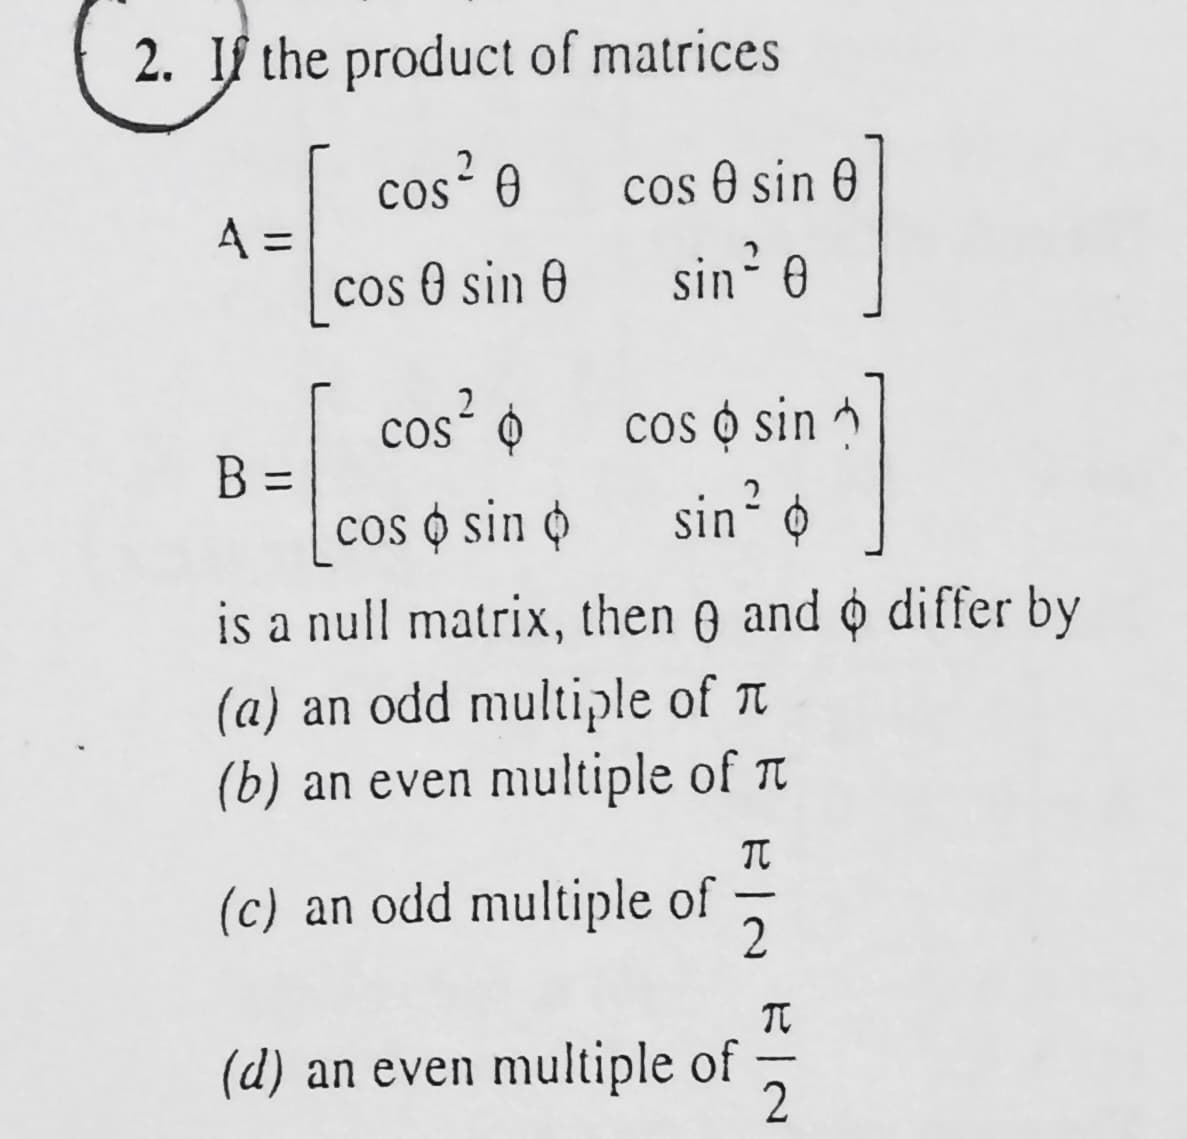 2. If the product of matrices
cos² 0
A =
cos O sin 0
cos e sin 0
sin 0
cos²
cos o sin
sin?
cos ó
B =
cos o sin o
is a null matrix, then e and o differ by
(a) an odd multiple of T
(b) an even multiple of T
(c) an odd multiple of
-
(d) an even multiple of
-
2.
